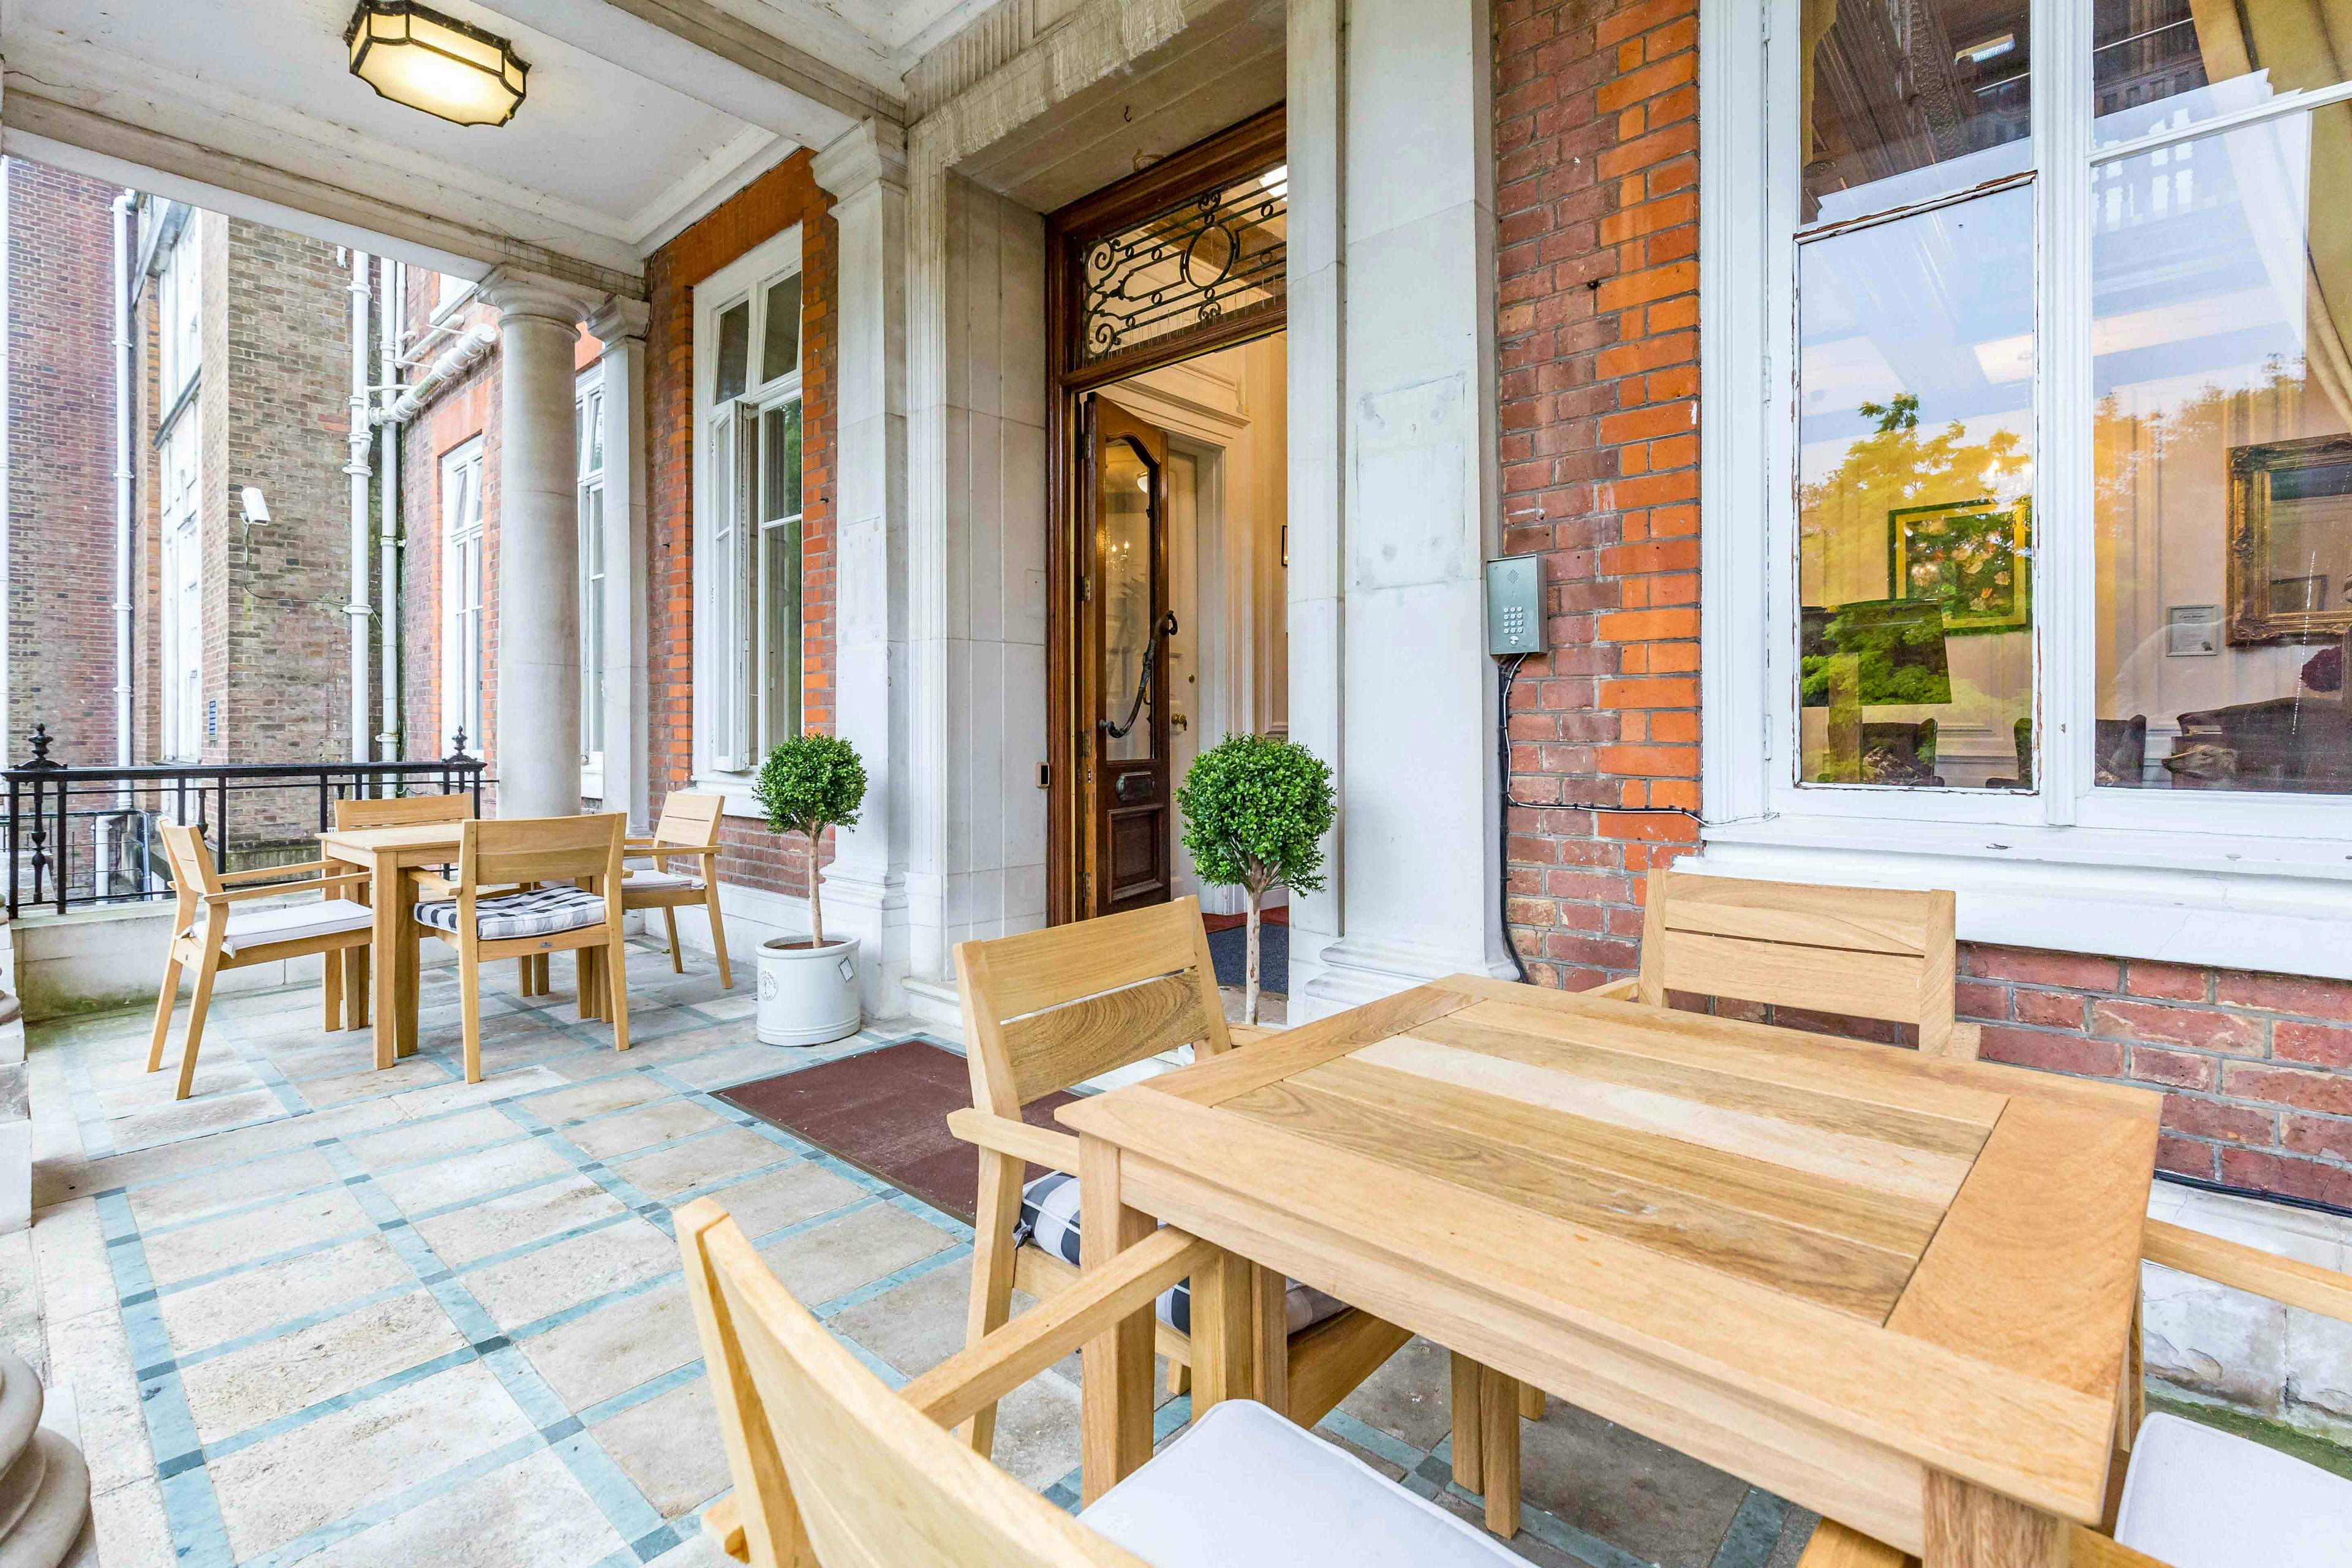 Outdoor Seating Area at Southgate Beaumont Care Home in London, England